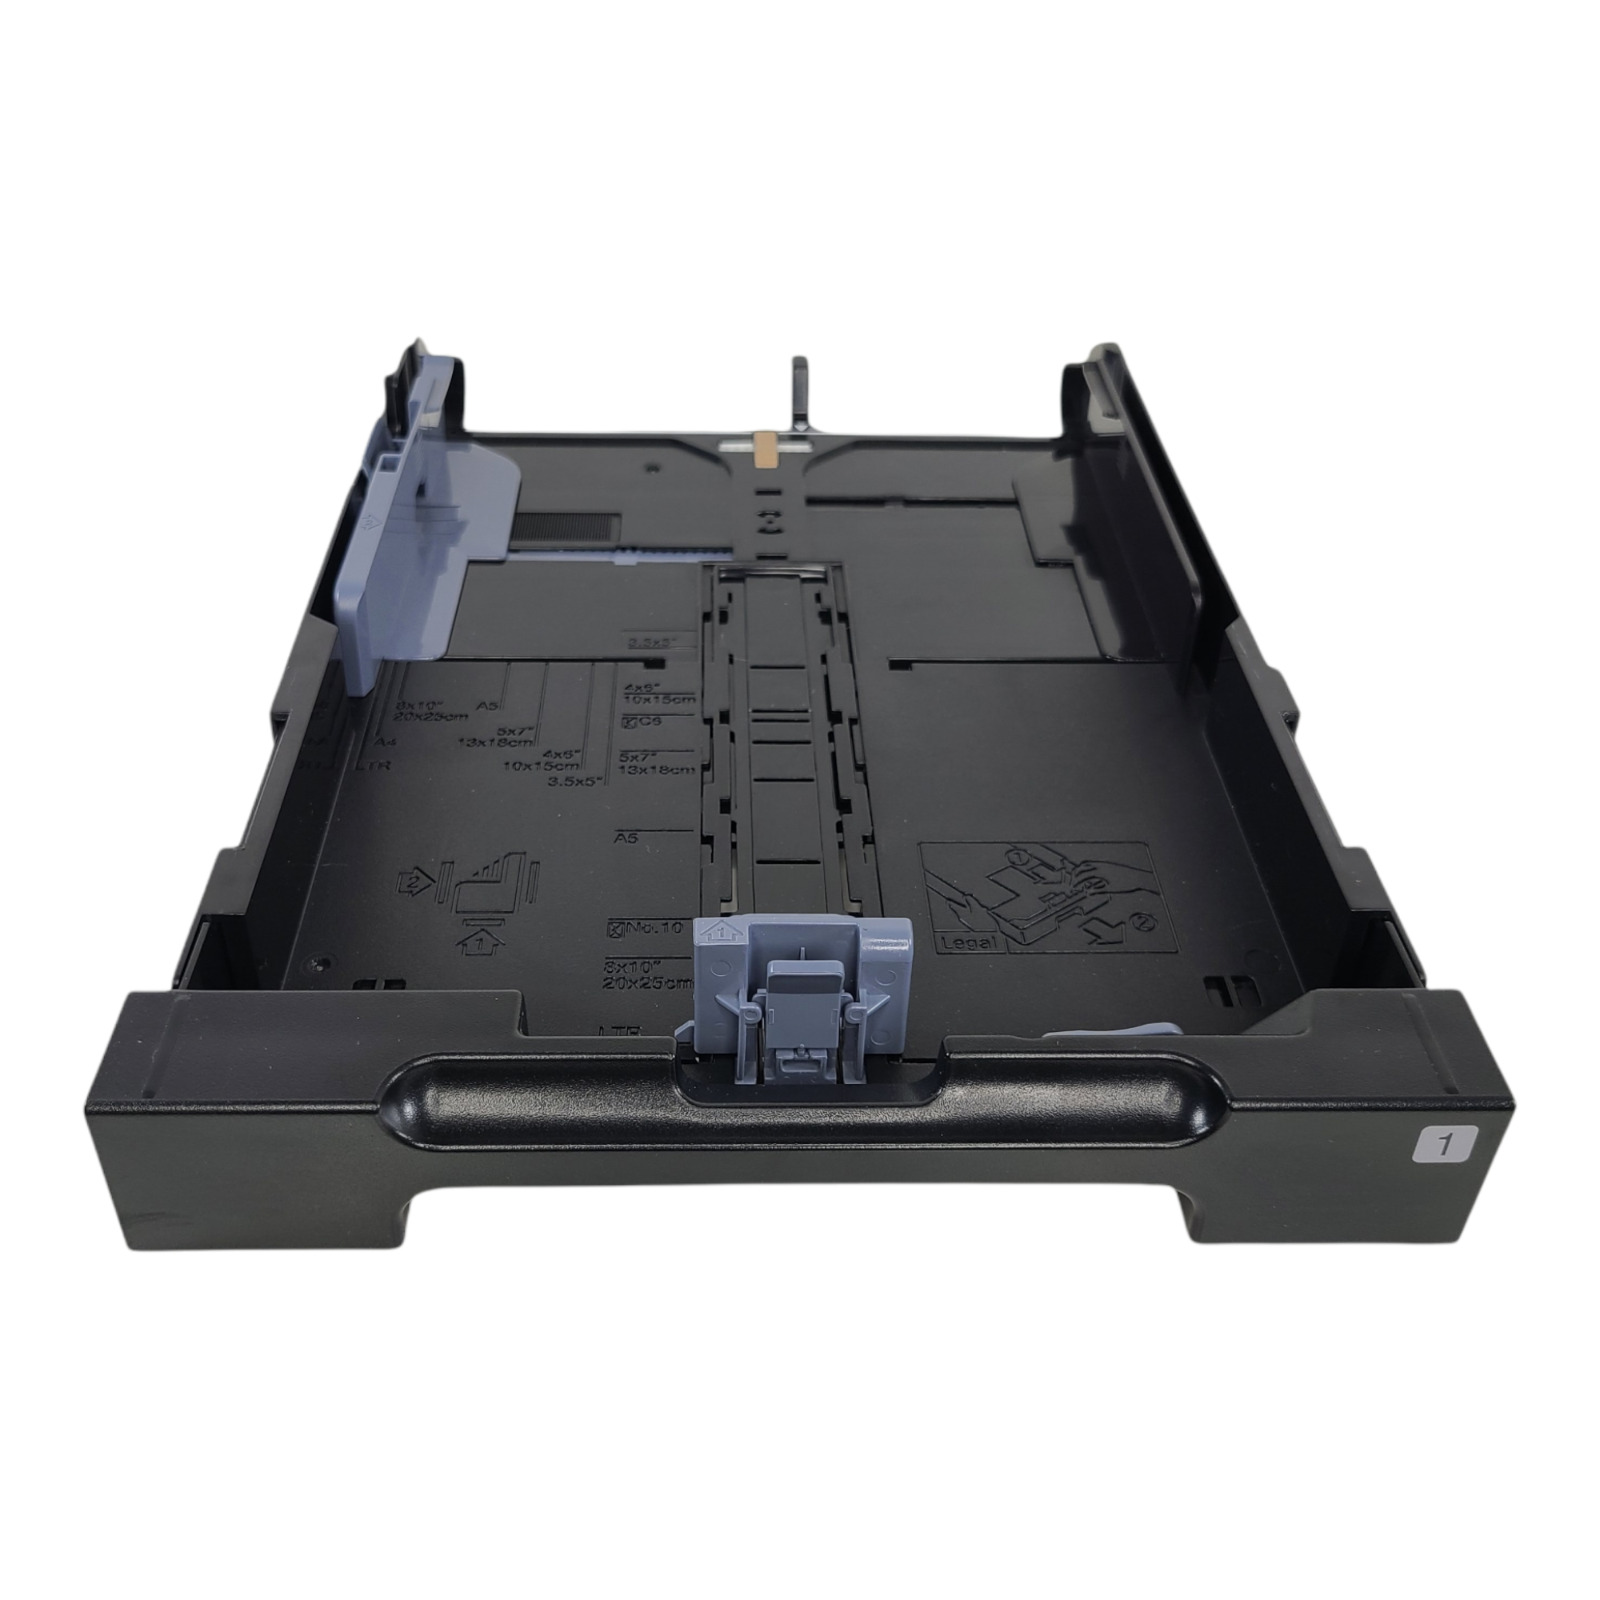 Used Epson Paper Loading Tray For Workforce Wf 3640 Wf 3530 Wf 3540 Upper Top 1 Ubbthreads 8367